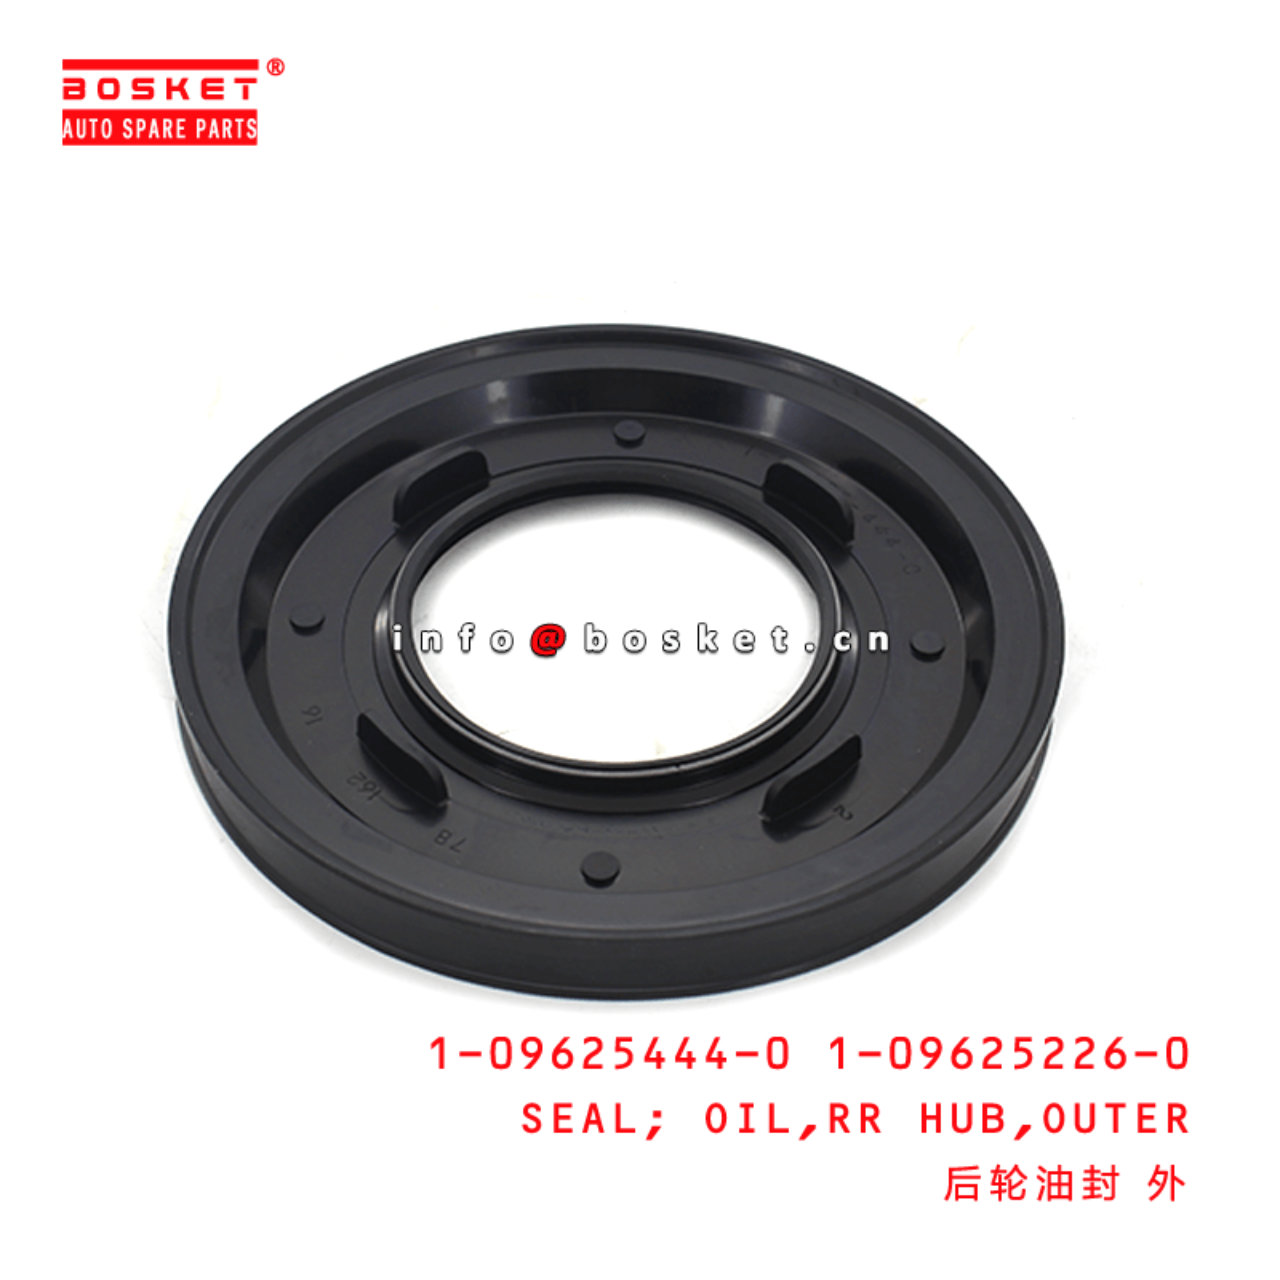 1-09625444-0 1-09625226-0 Outer Rear Hub Oil Seal 1096254440 1096252260 Suitable for ISUZU CXZ81 10P